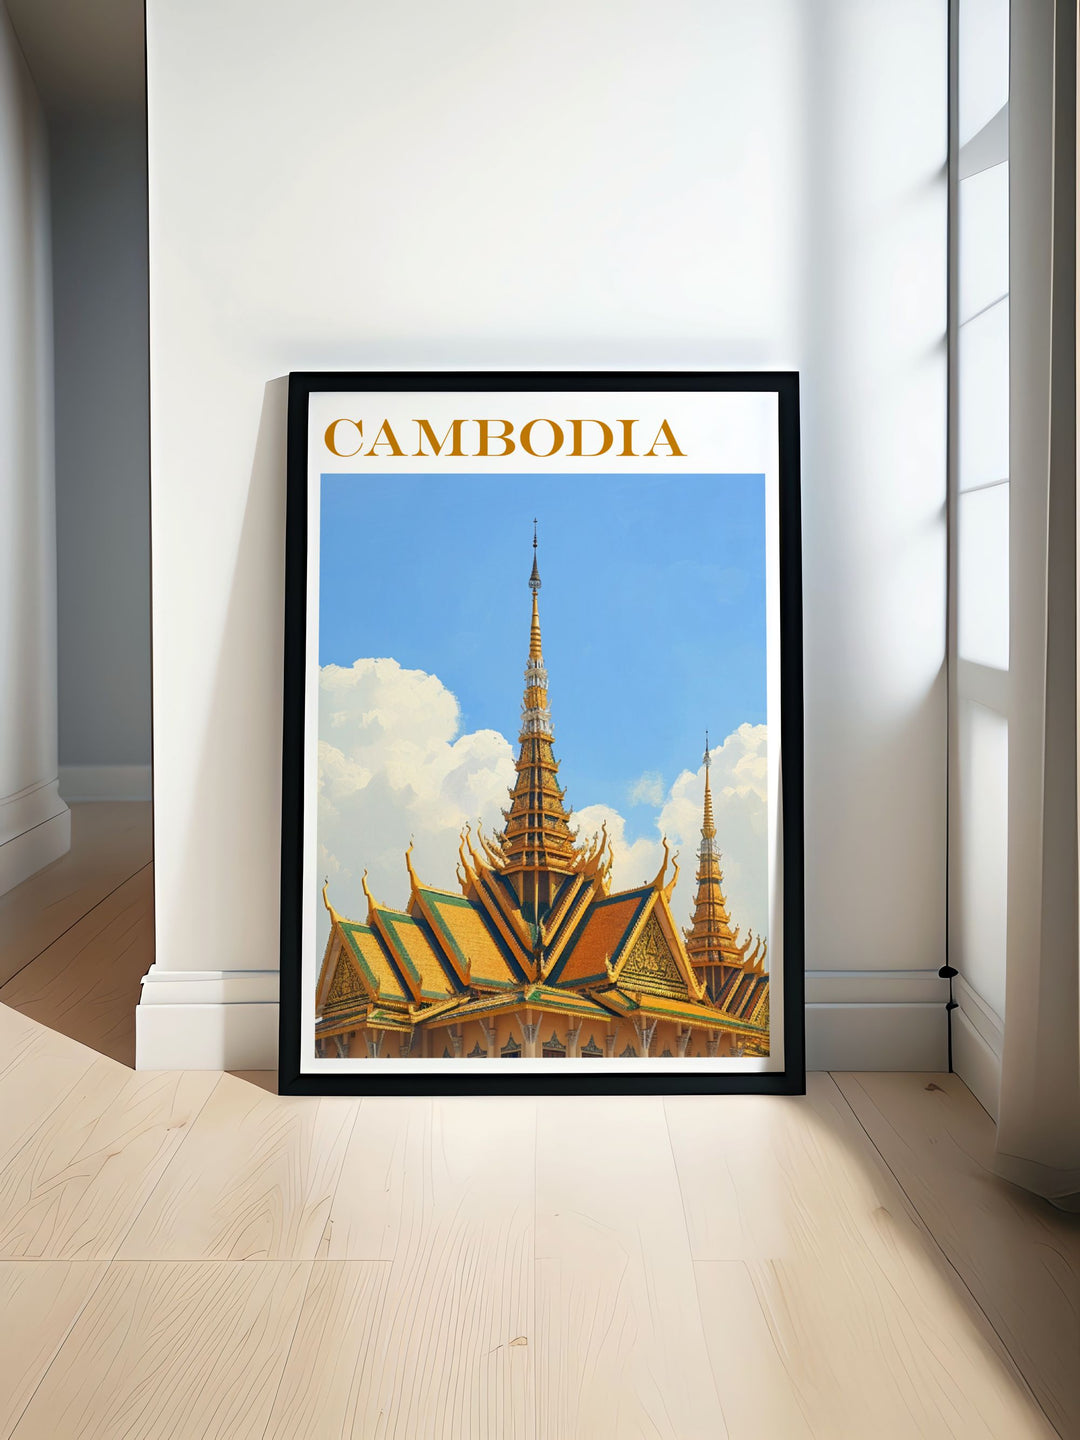 Royal Palace travel poster showcasing the grandeur of Cambodias iconic landmark with intricate architectural details perfect for adding elegance to any home decor.